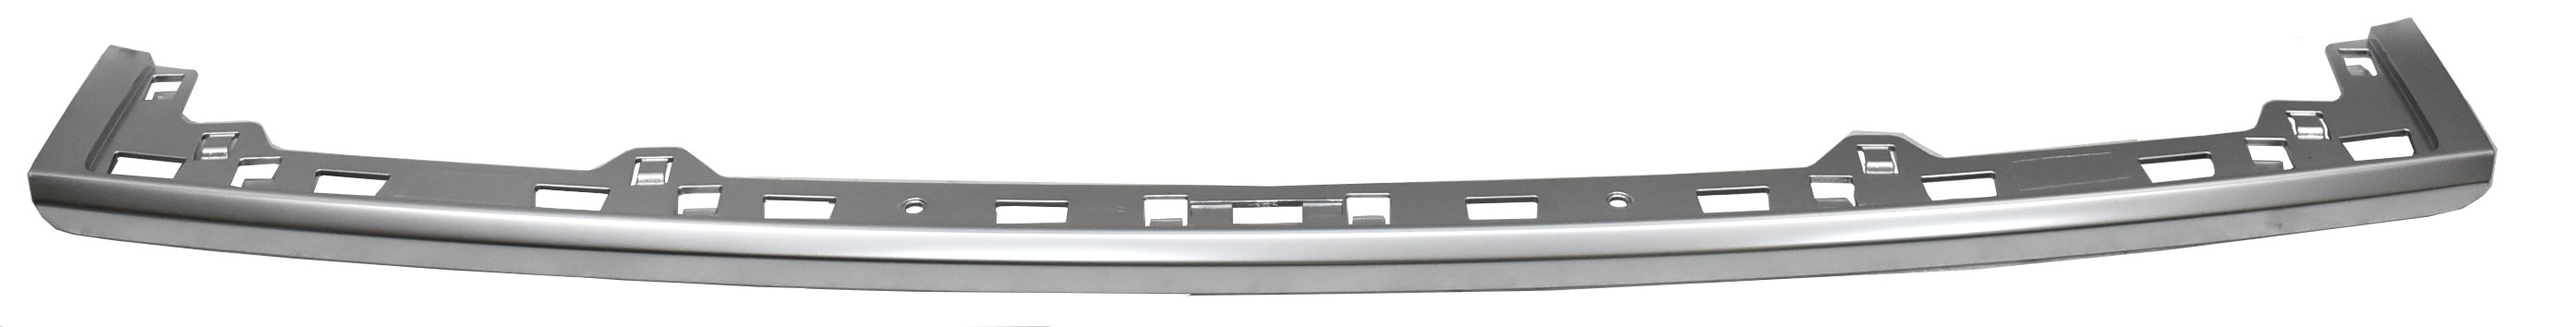 Aftermarket METAL REAR BUMPERS for JEEP - GRAND CHEROKEE, GRAND CHEROKEE,14-21,Rear bumper step pad